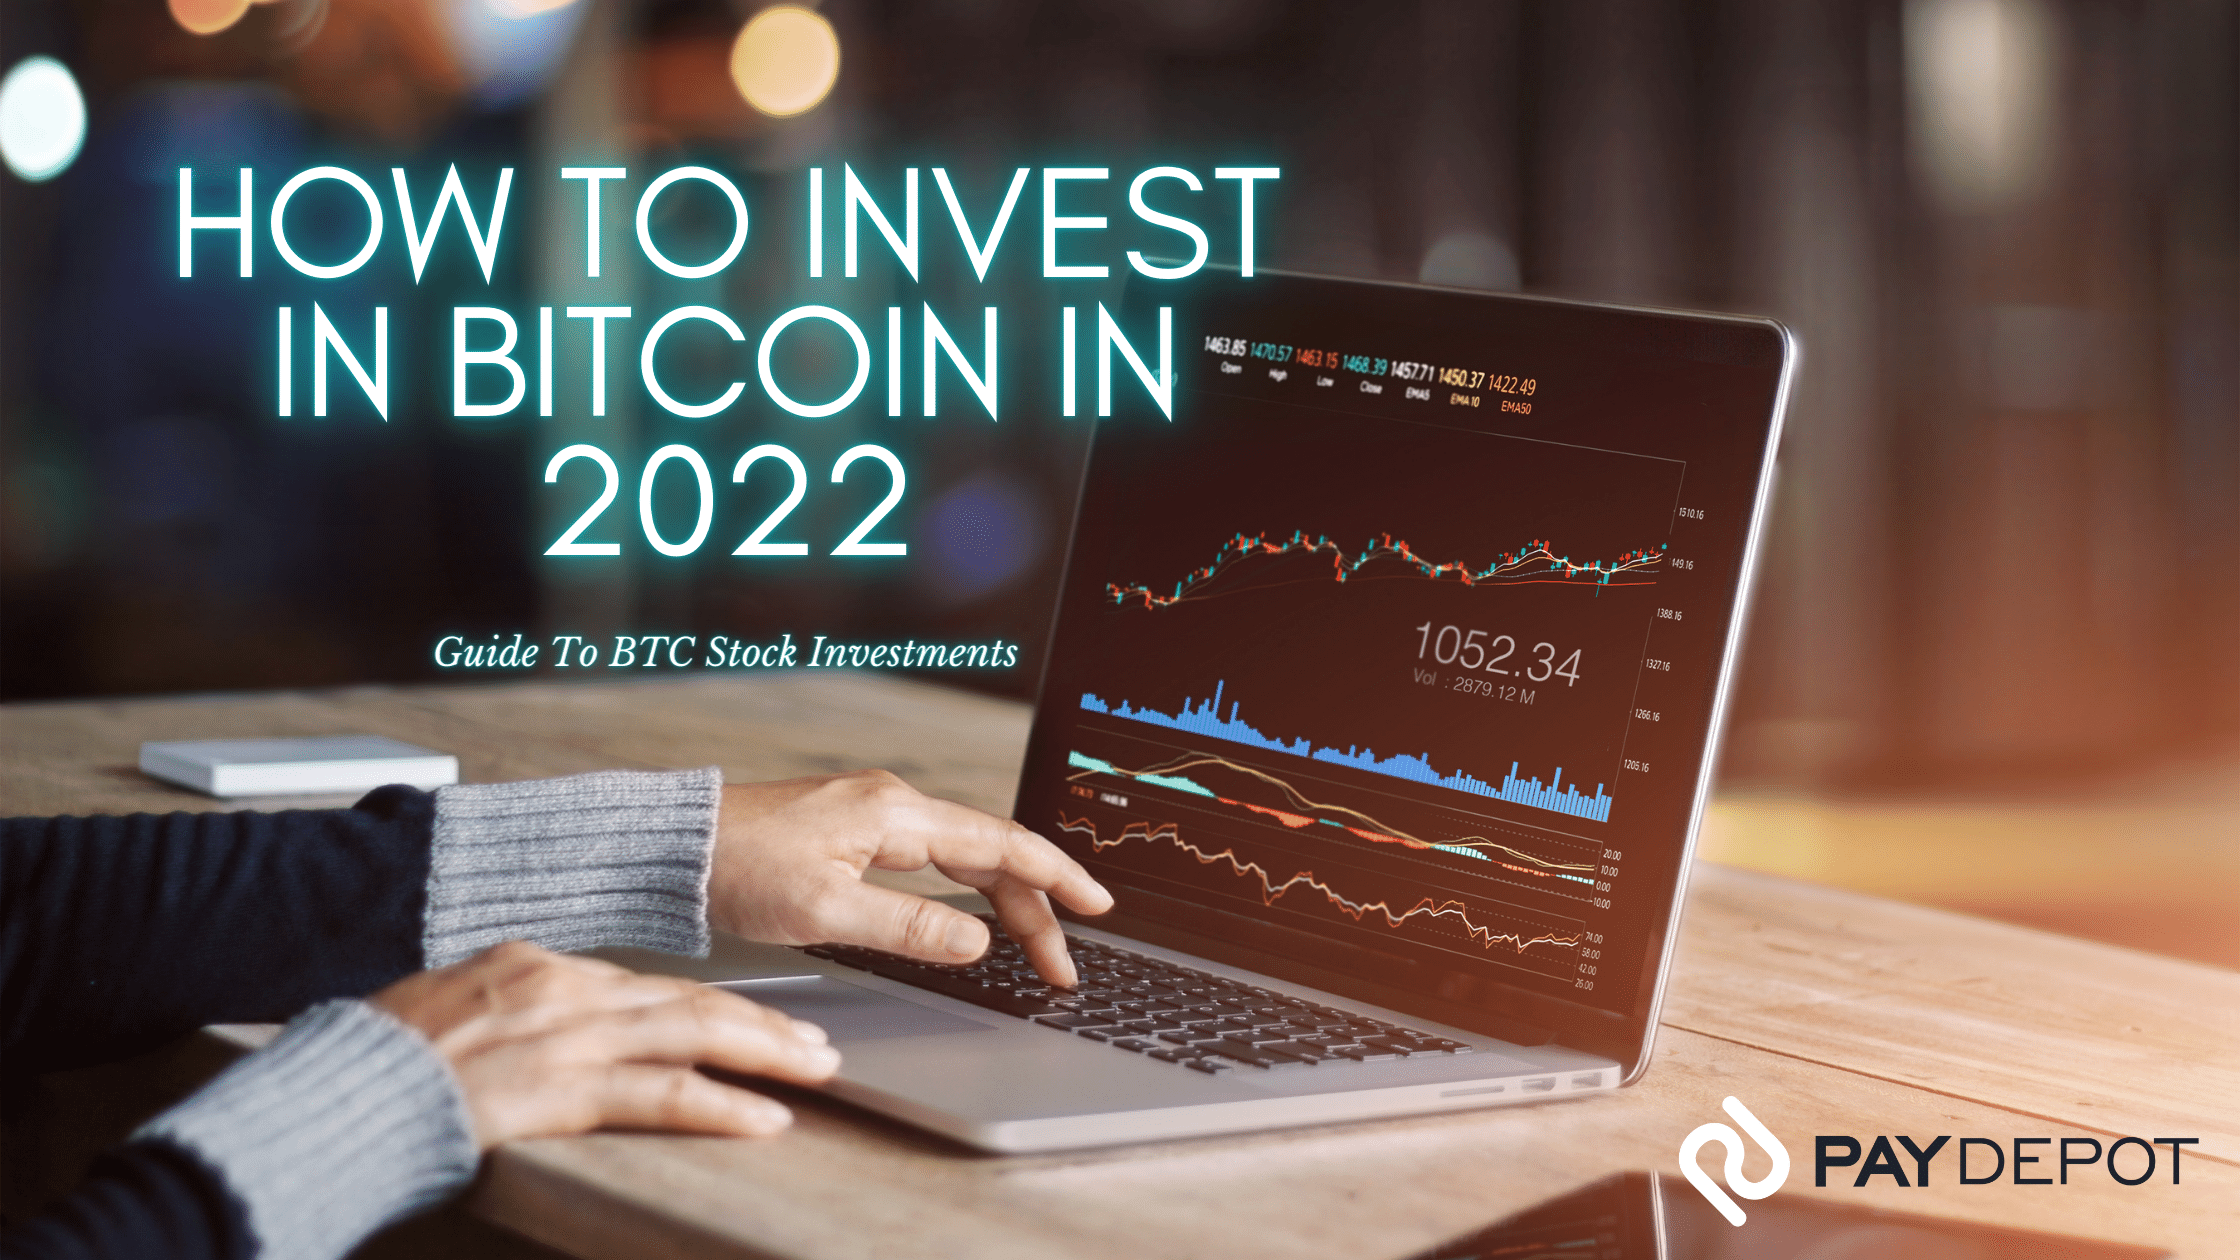 How to Invest in Bitcoin in 2022 - Guide to BTC Stock Investments